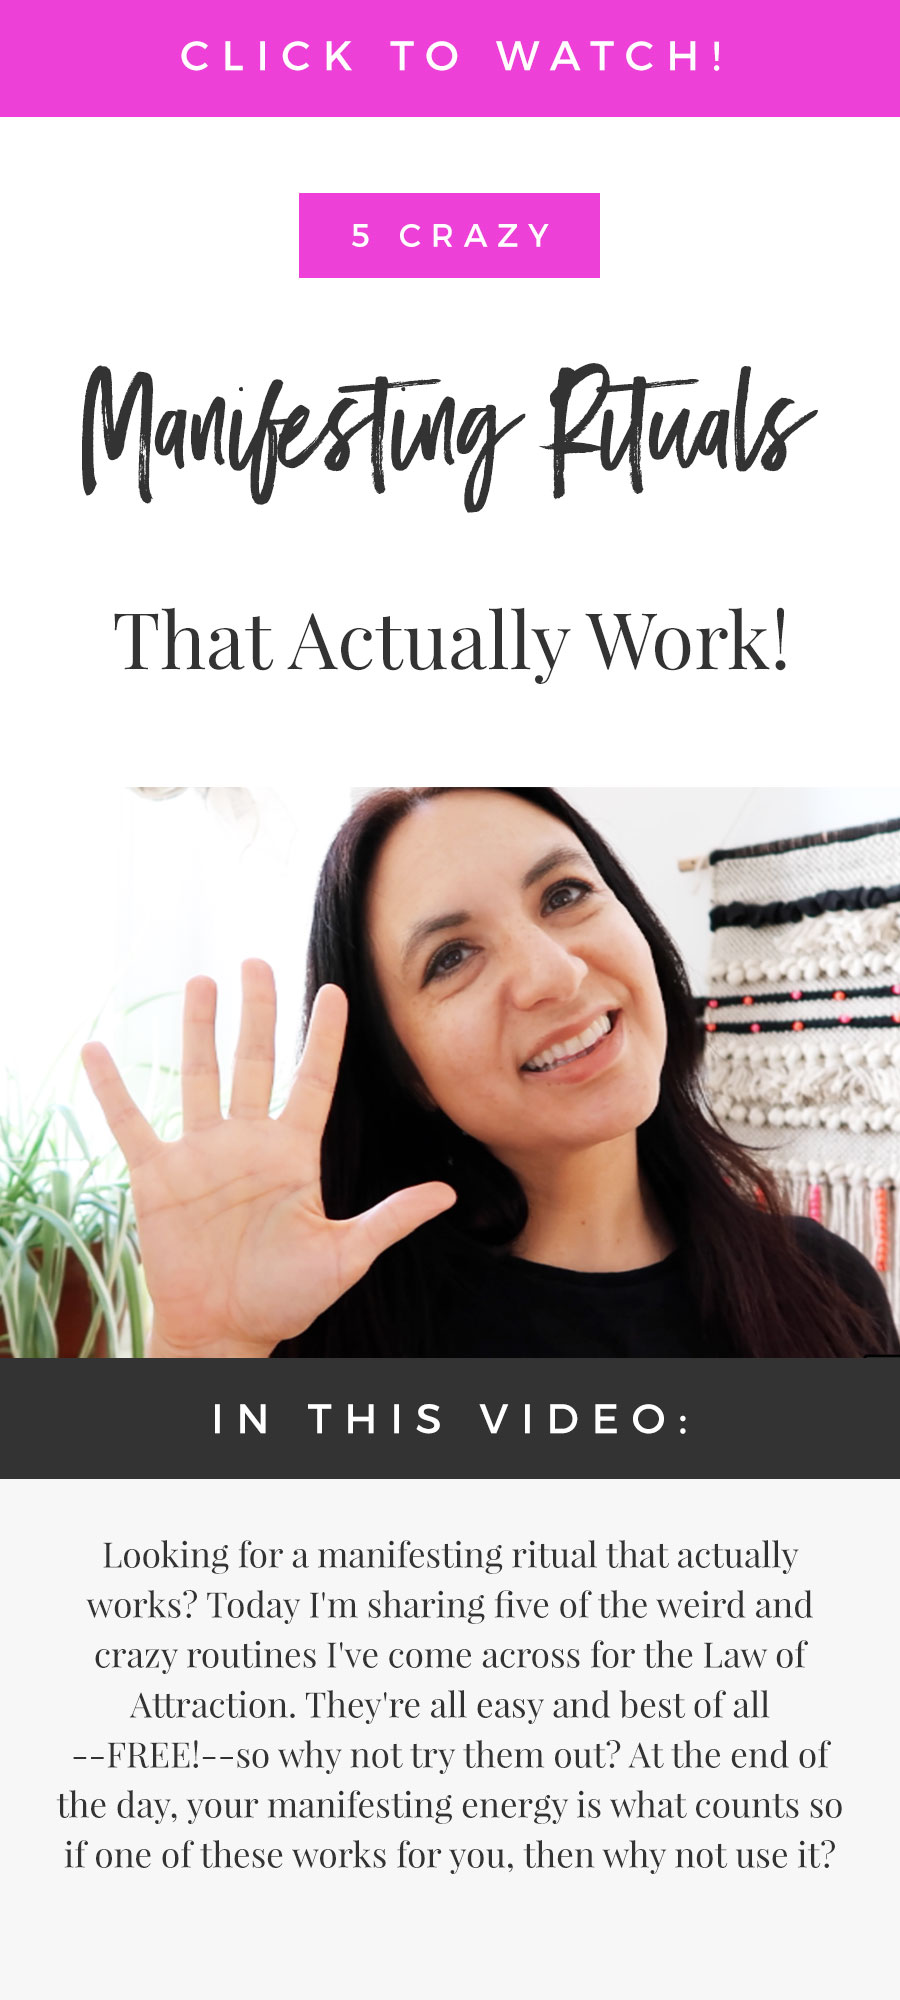 5 Crazy Manifesting Rituals That Actually Work!